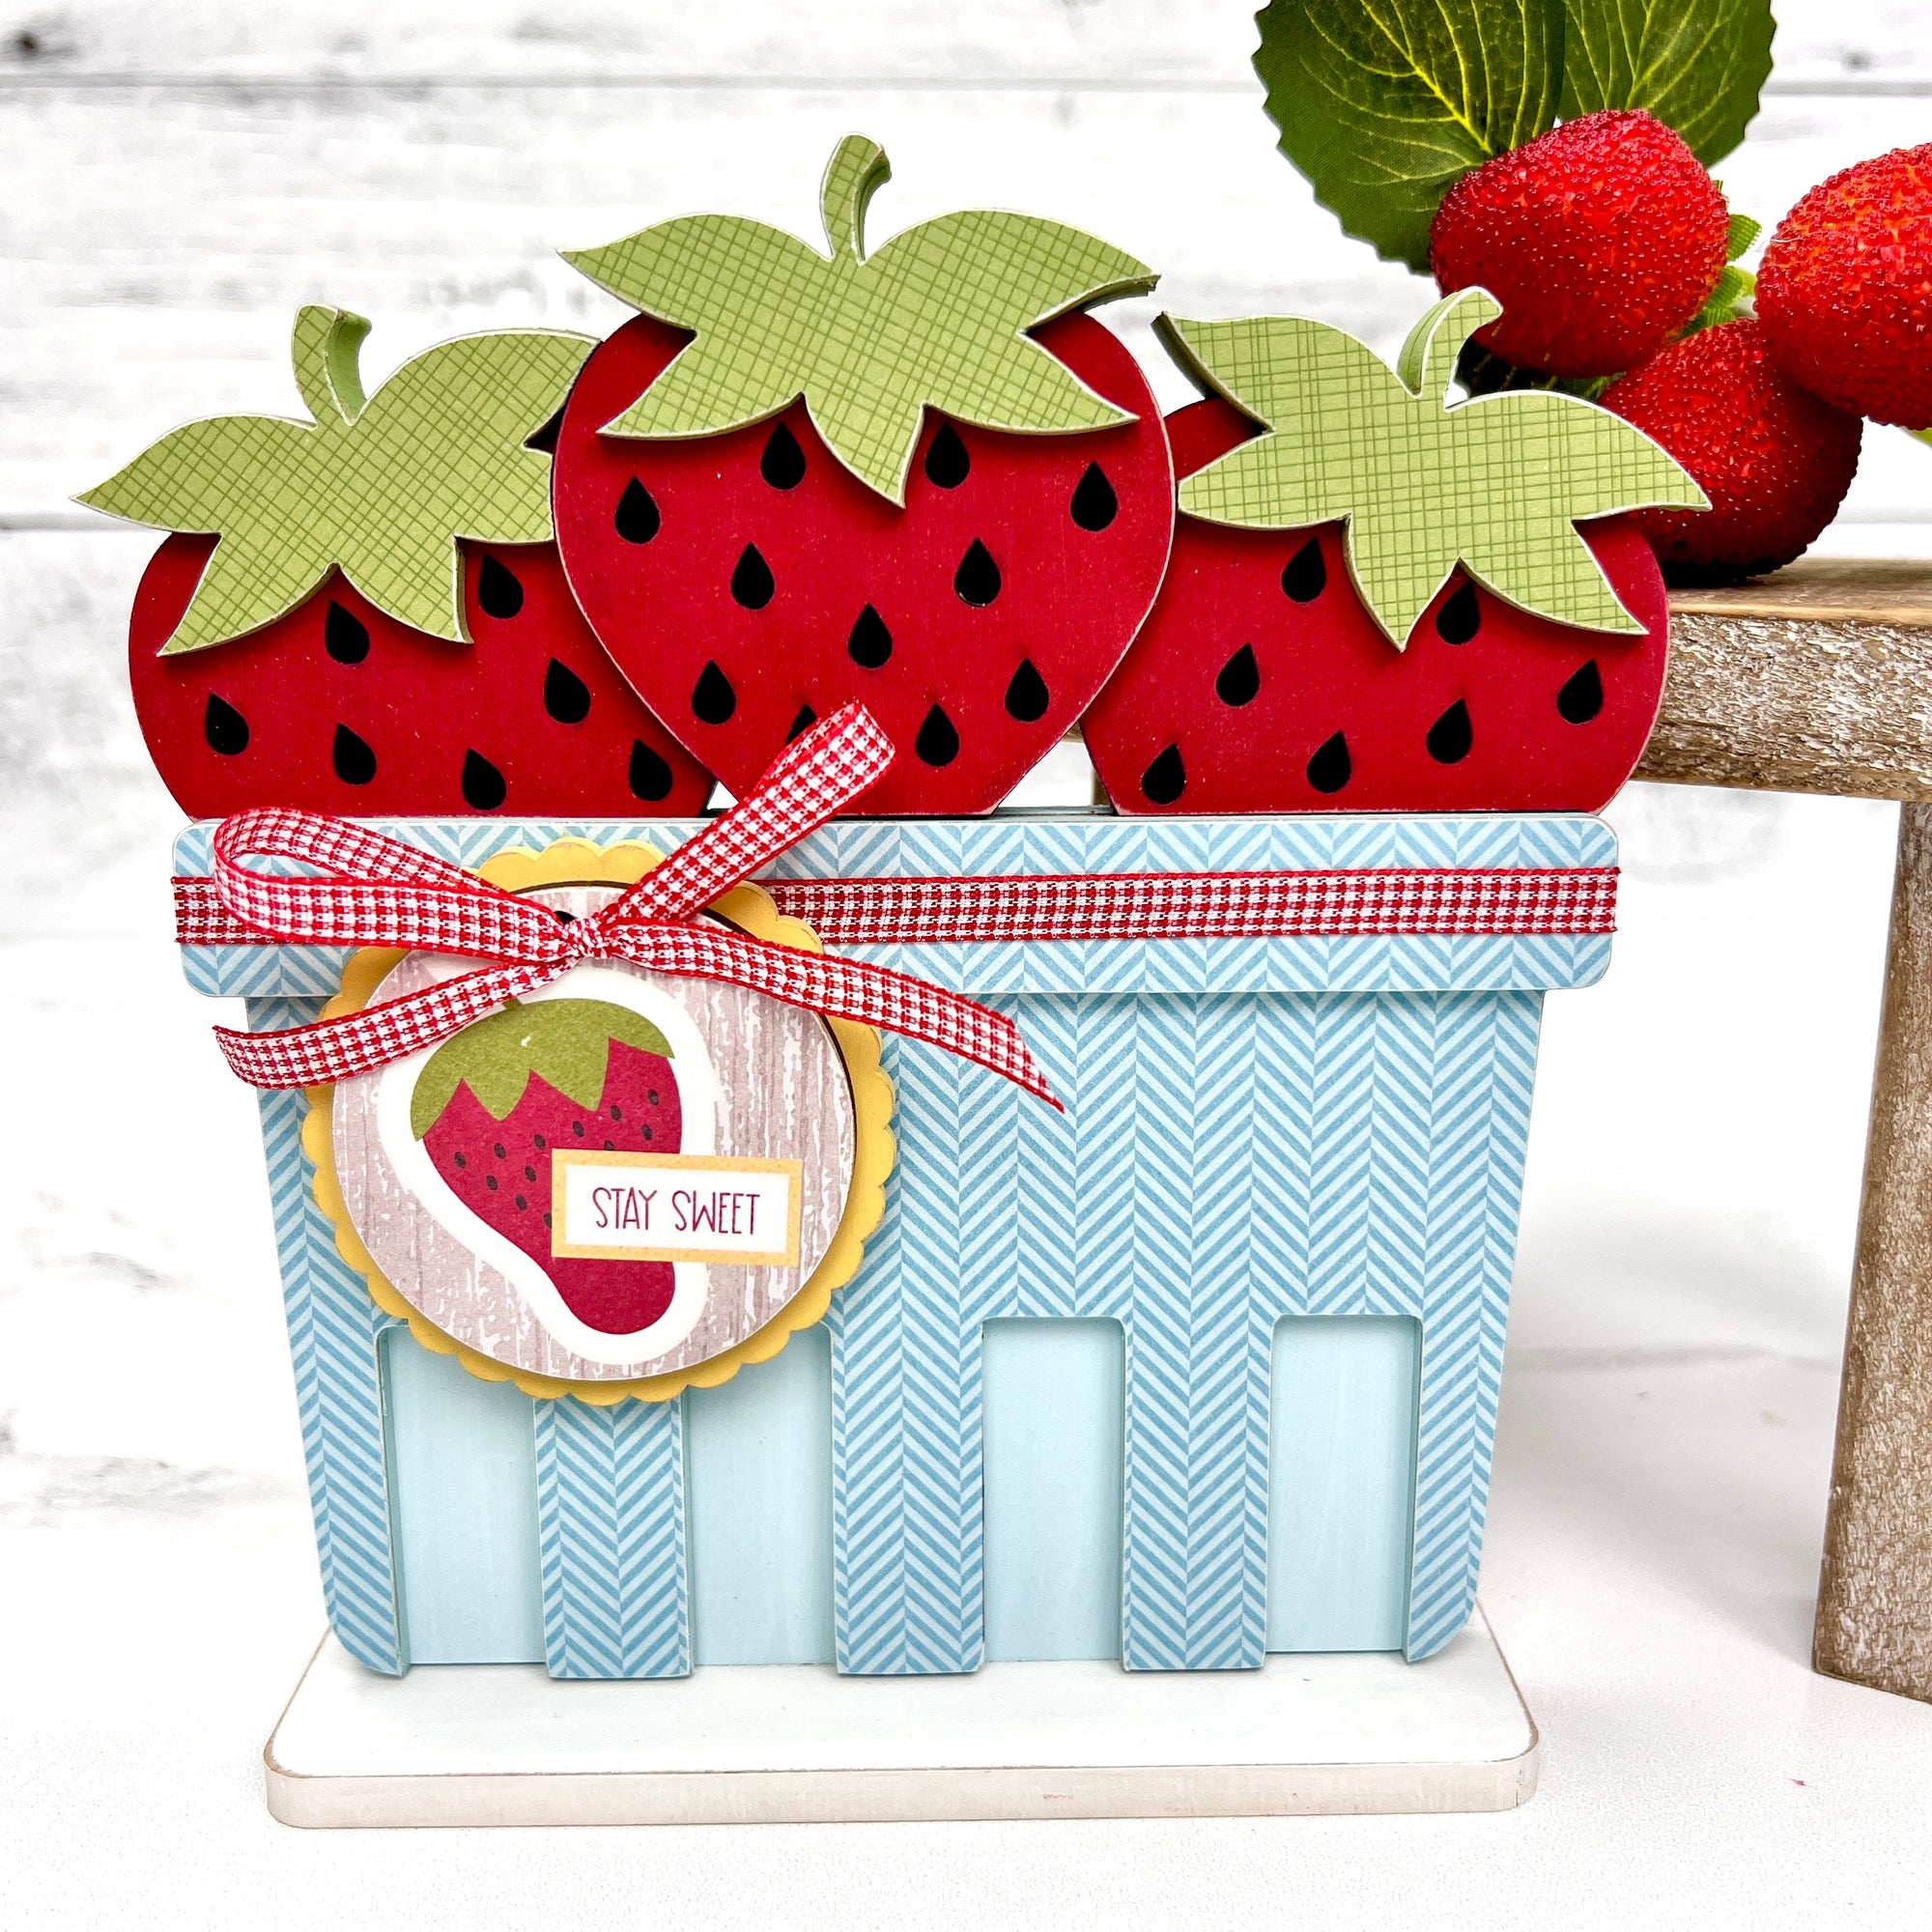 Strawberry crate with red strawberries wood decor caft kit